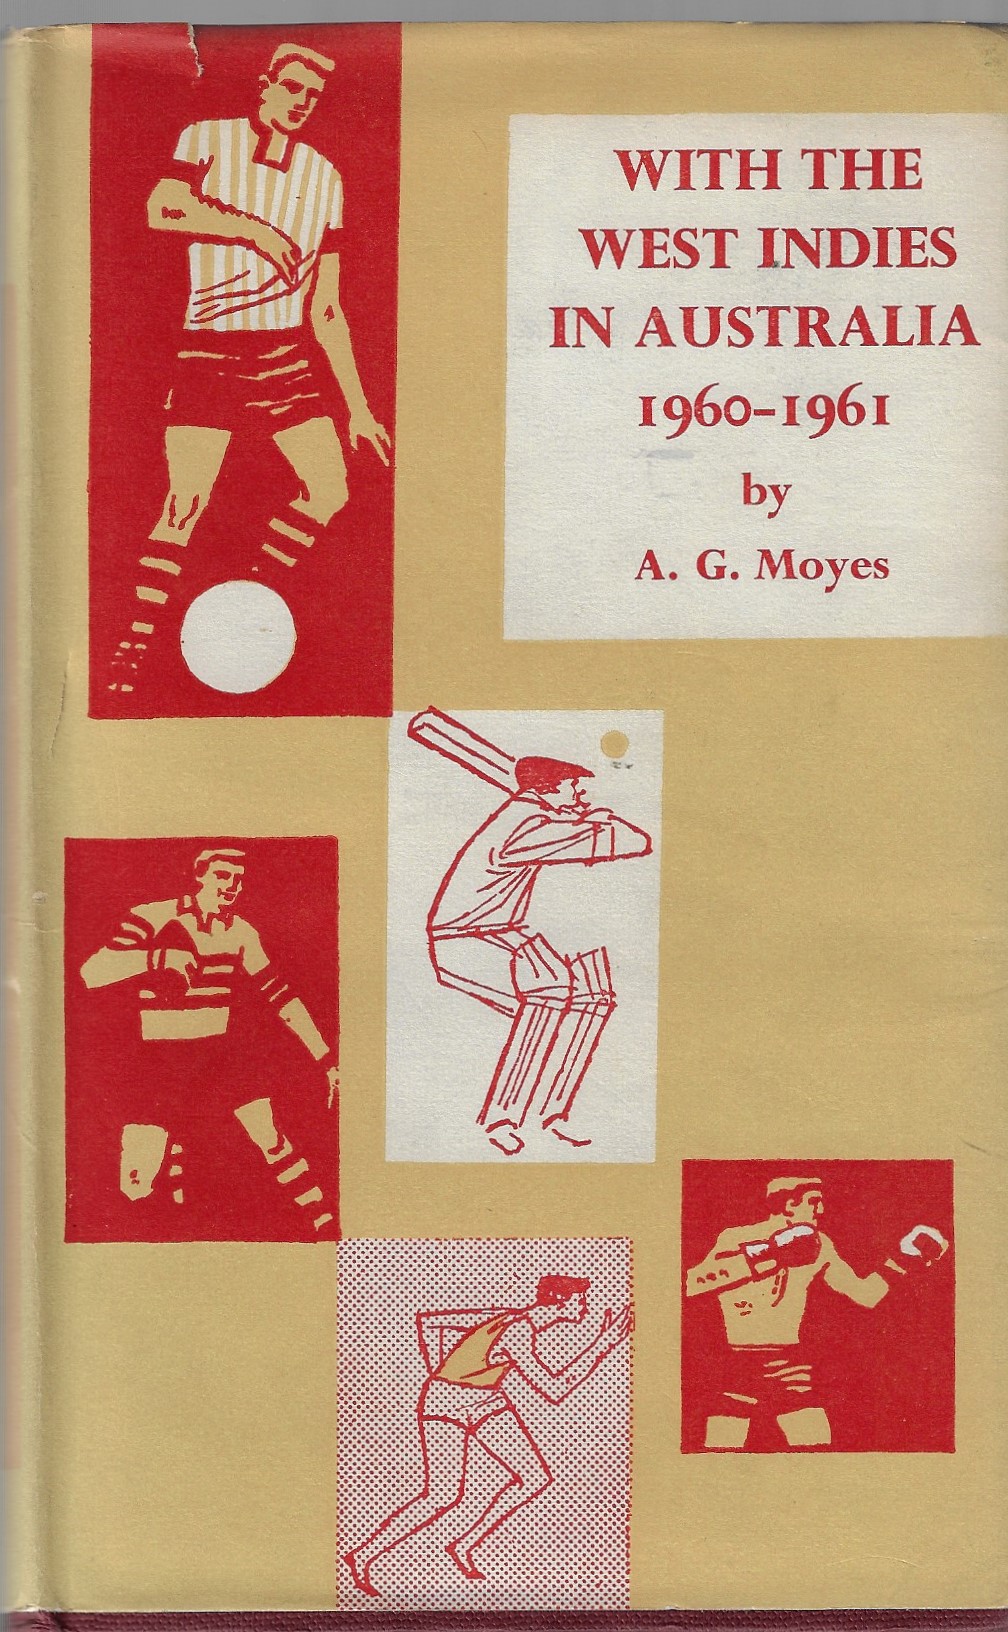 Moyes, A.G. - With the West Indies in Australia 1960-1961